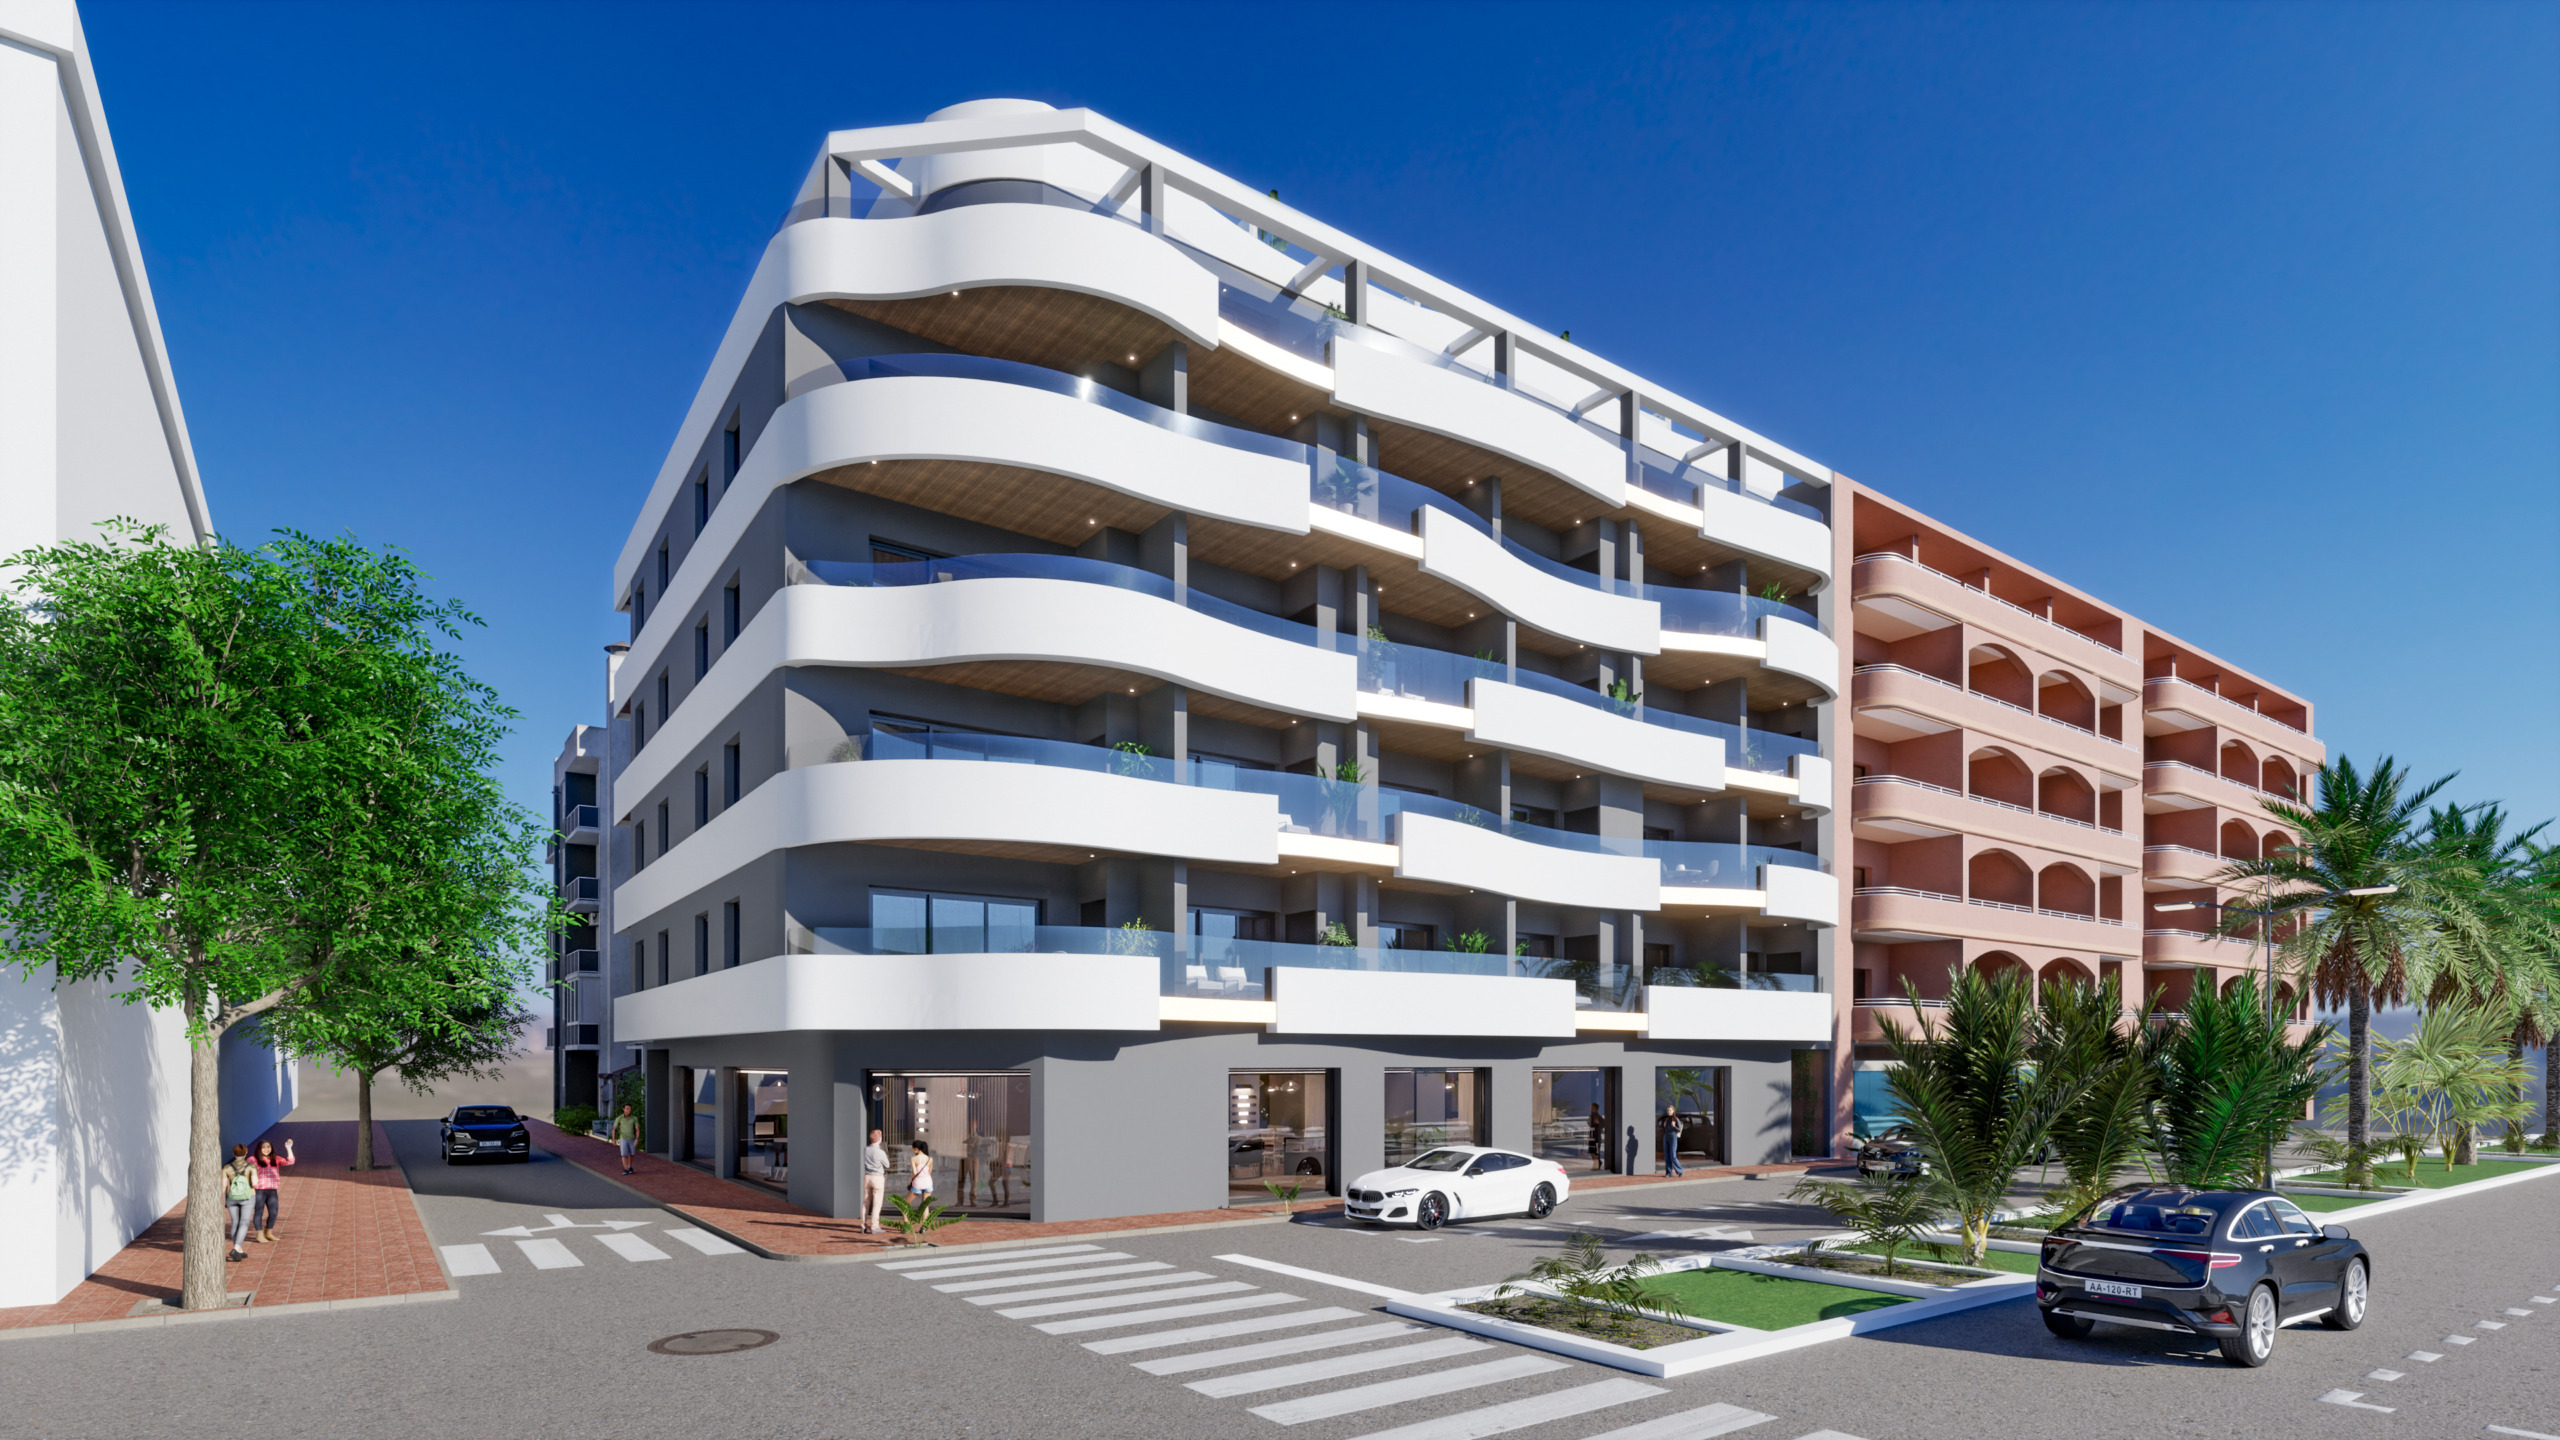 Exclusive and luxurious apartments in Torrevieja